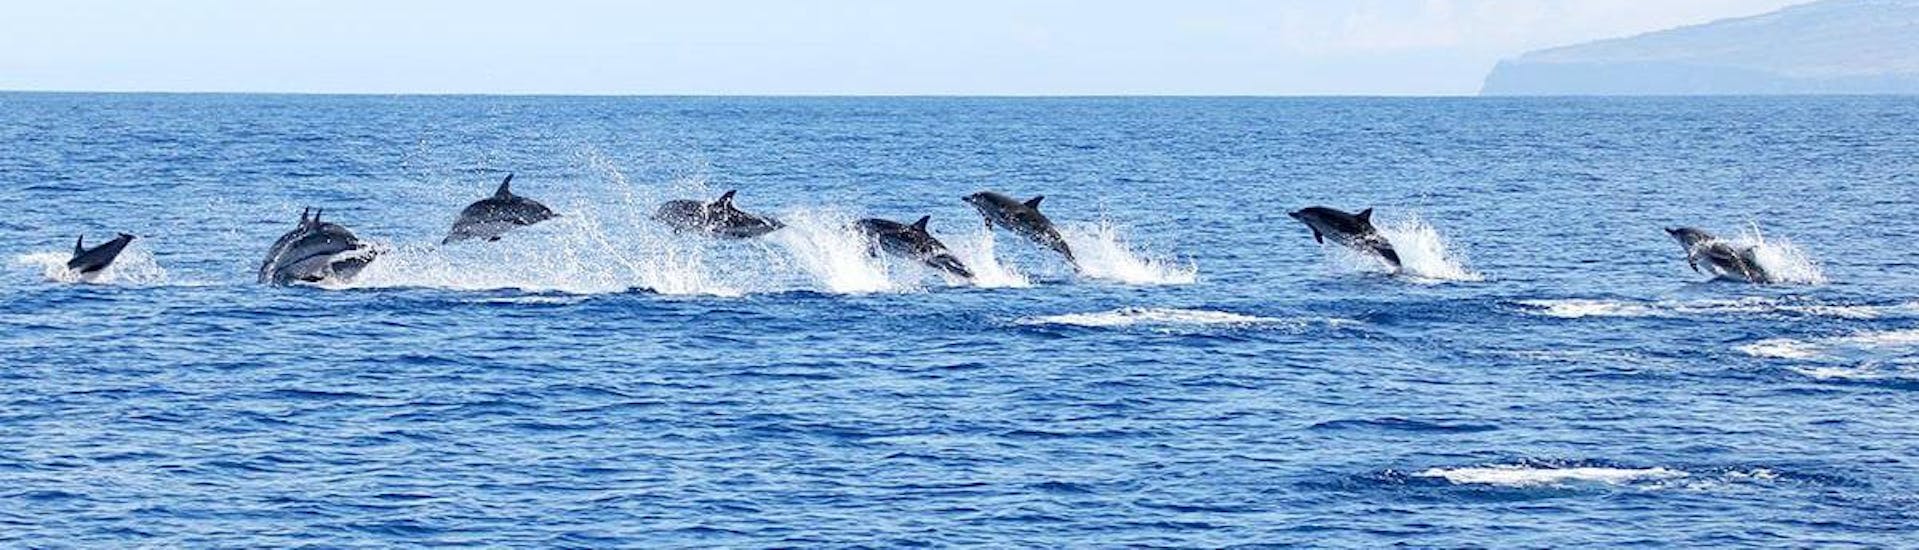 Dolphins are swimming, one of the beautiful things that you can see during the Picos de Aventura Azores.